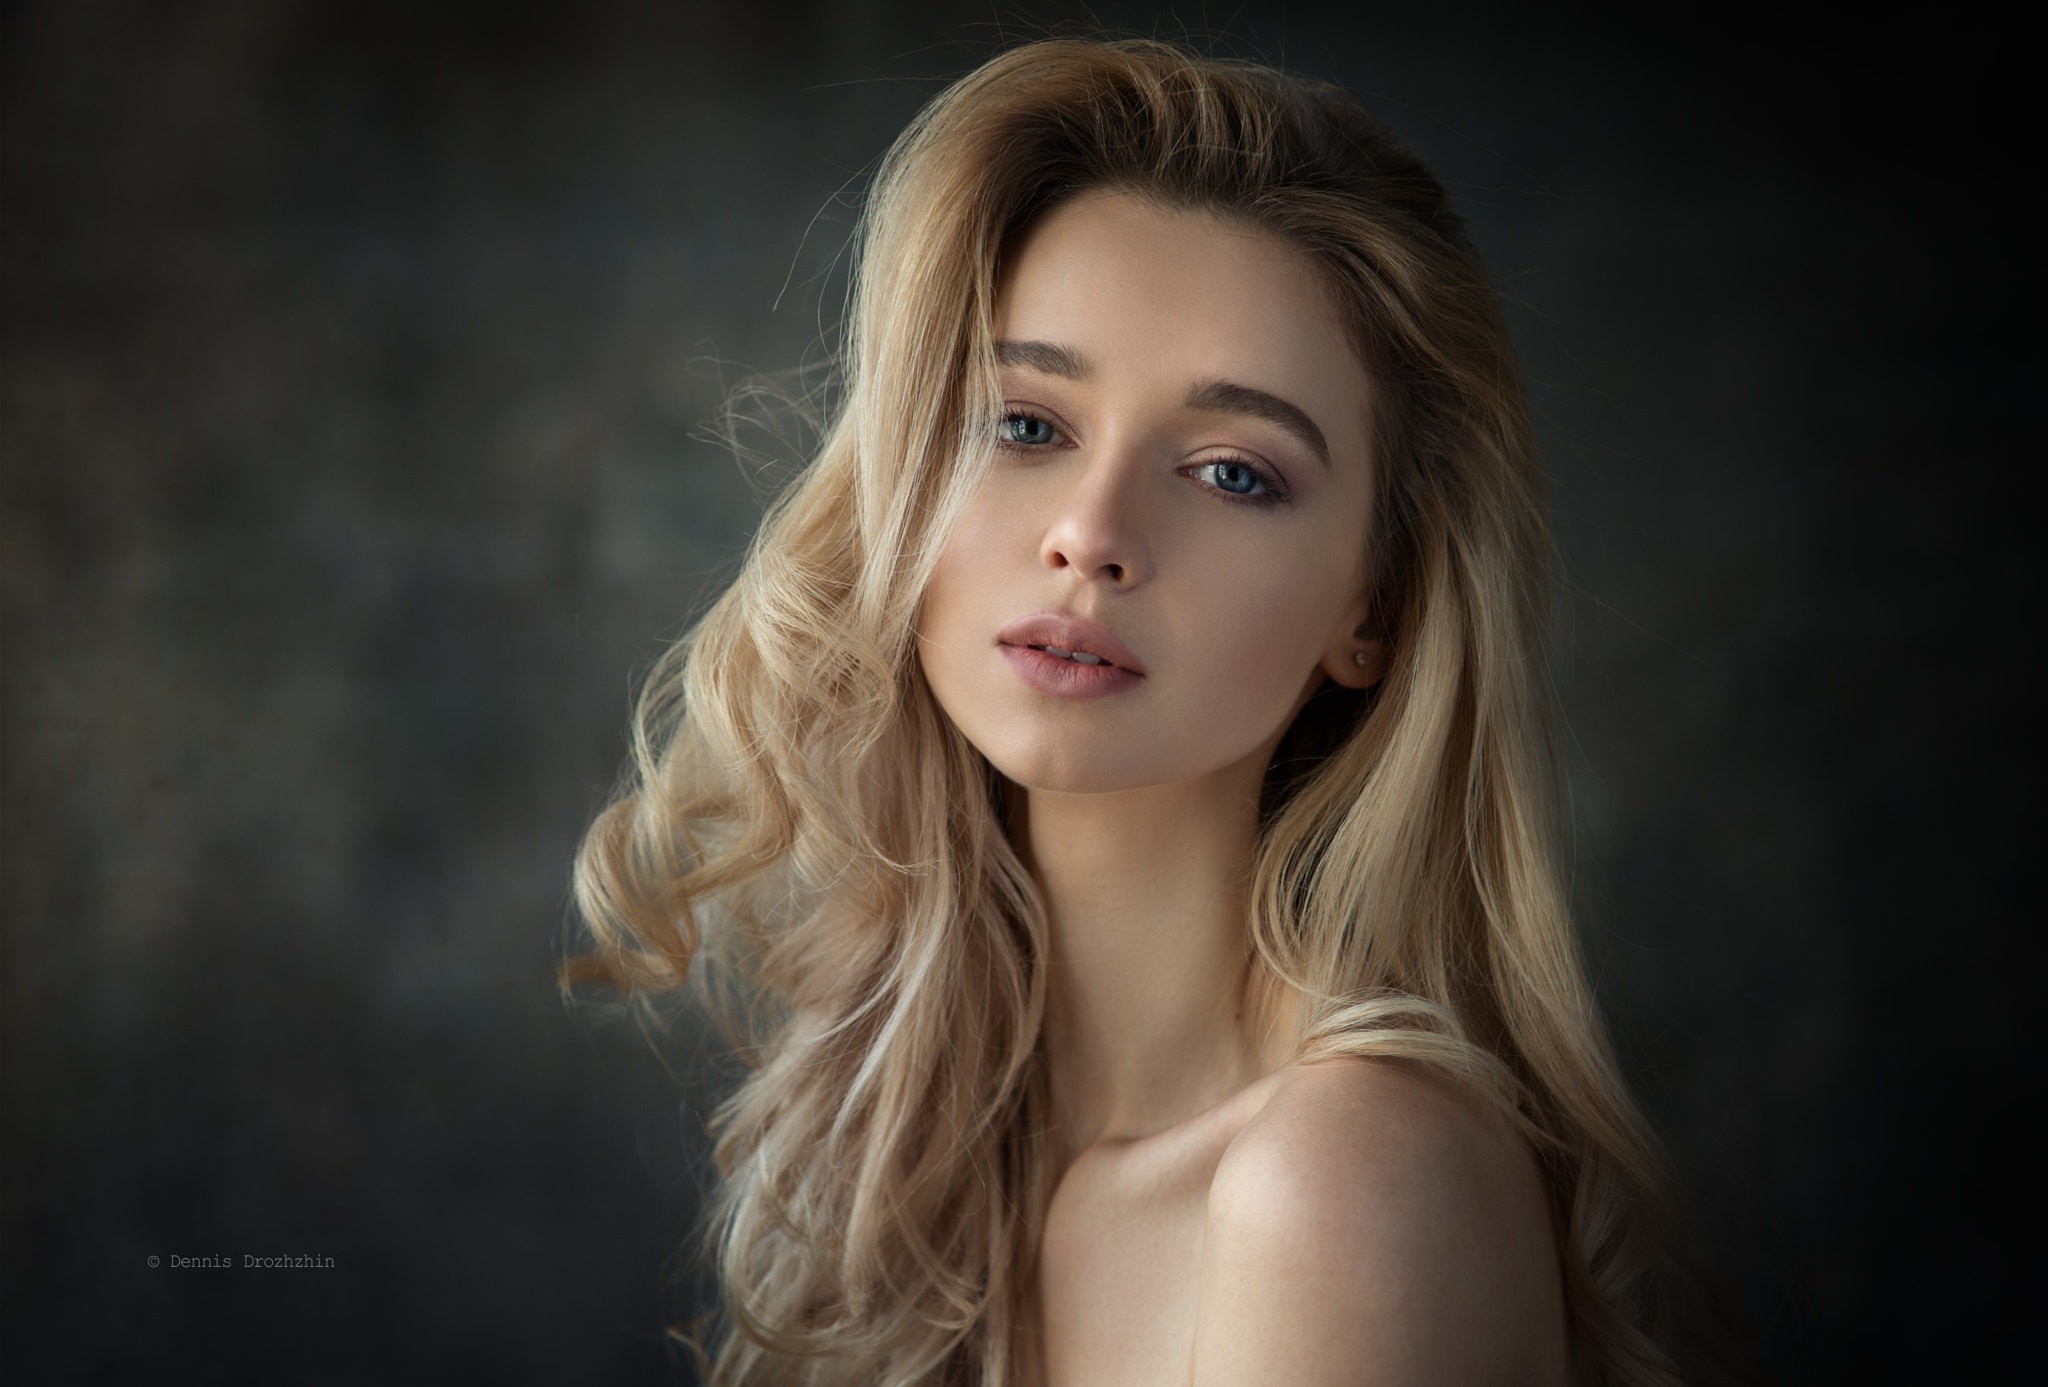 People 2048x1387 women face blonde portrait bare shoulders wavy hair hair in face simple background Dennis Drozhzhin Anna Tsaralunga women indoors gray eyes